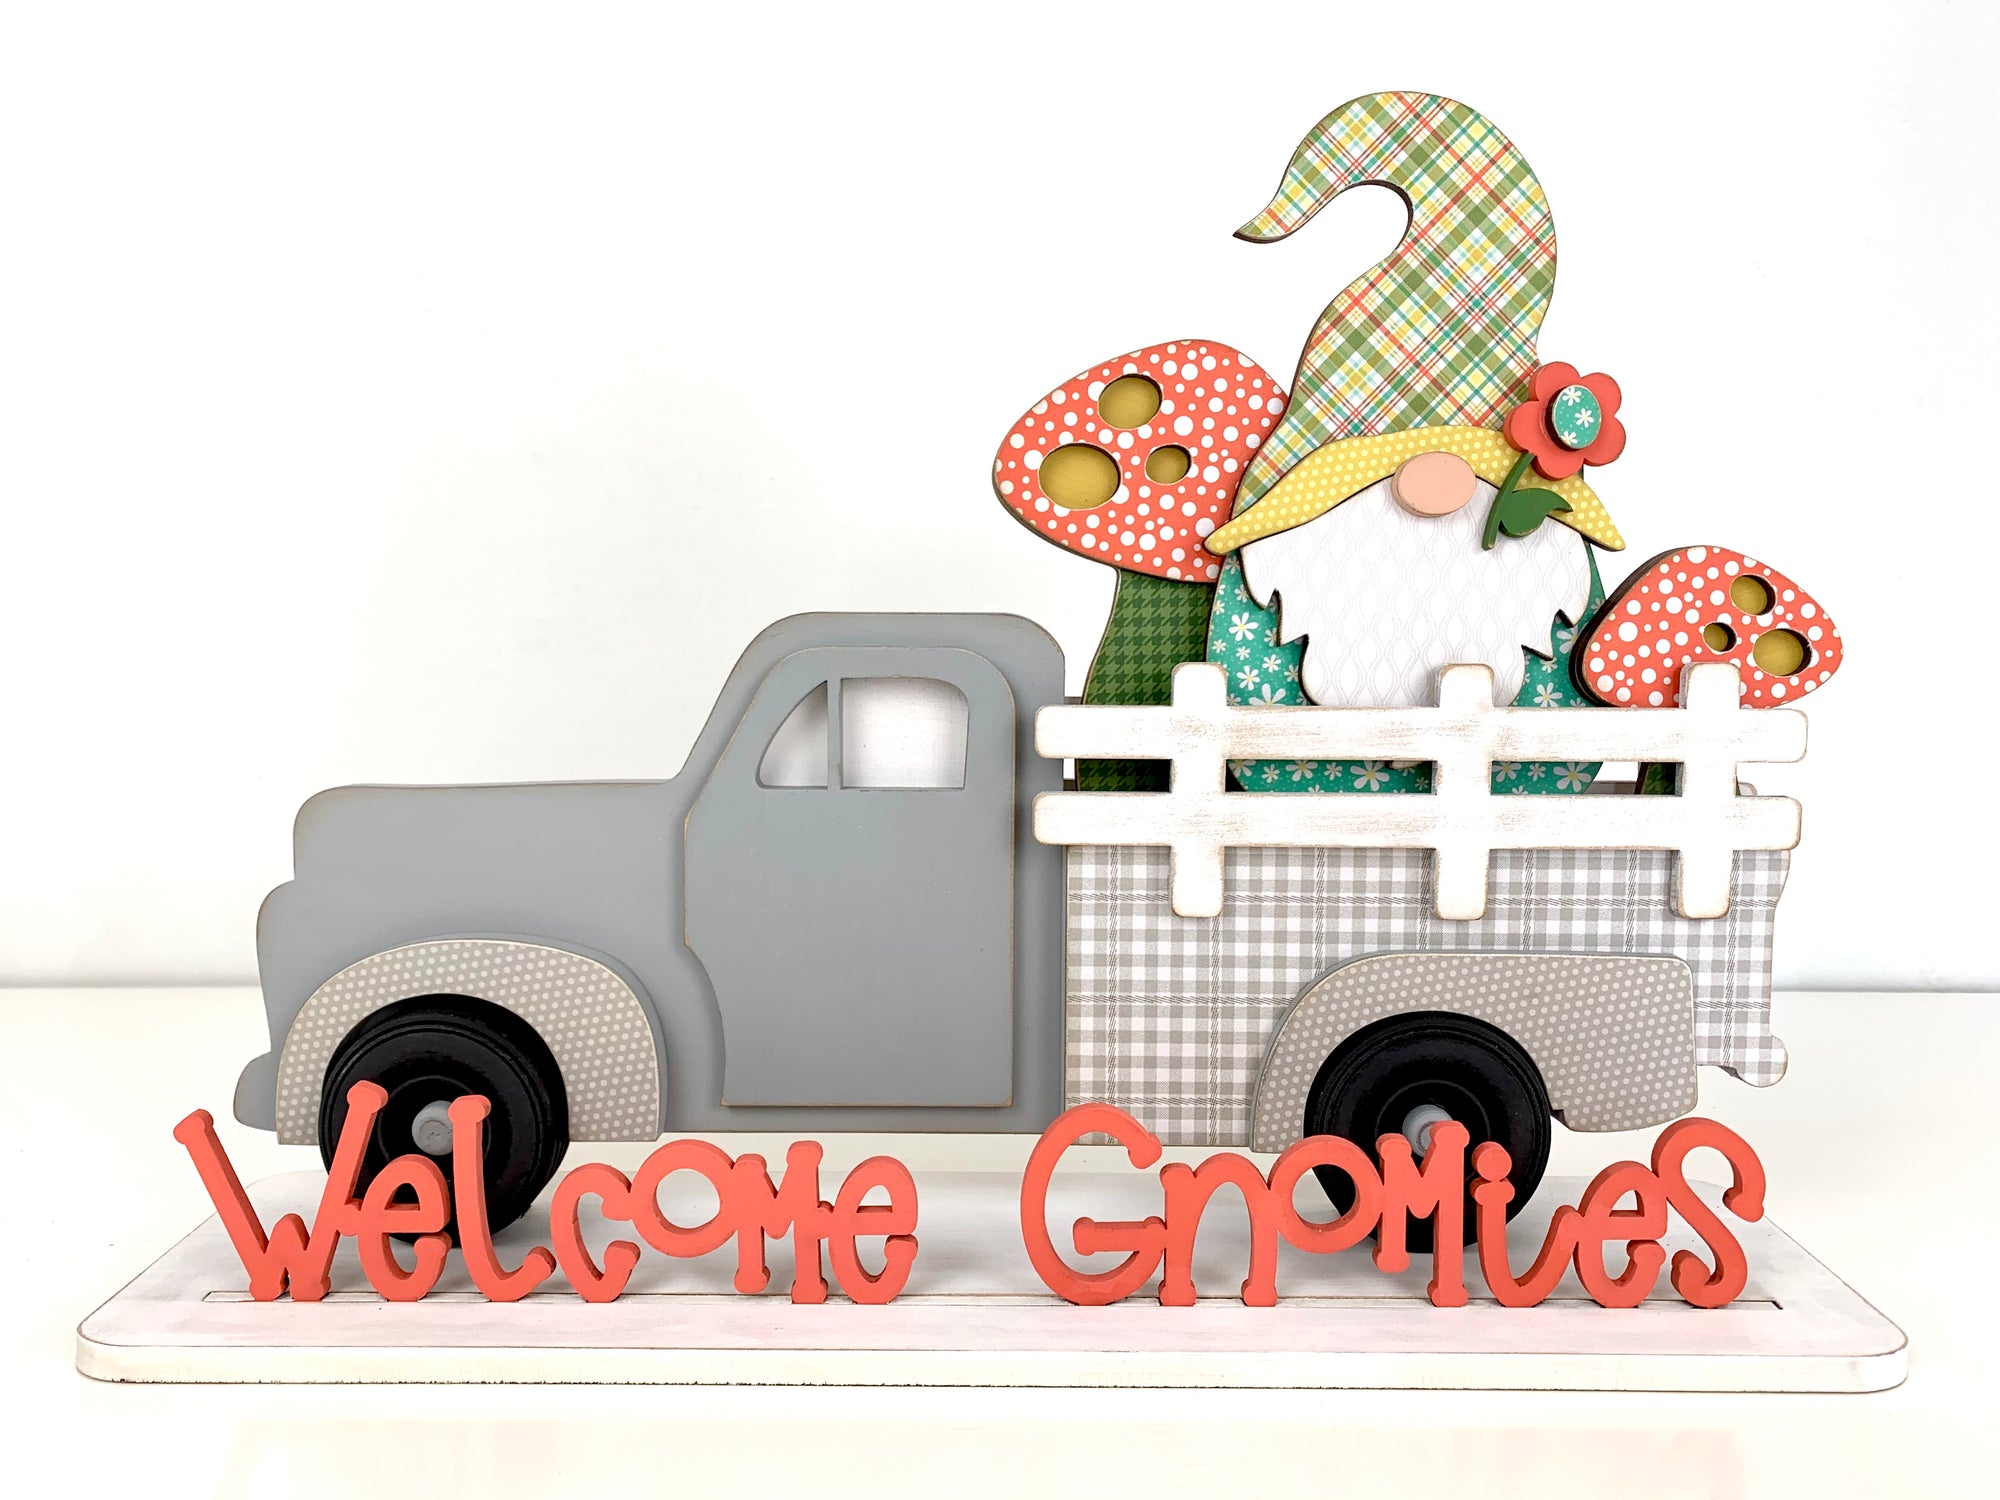 Wood farmhouse pick up truck with interchangeable truck bed inserts.  Welcome gnomies truck bed insert for Farmhouse pick up truck.  Handmade wood truck decor. Gnome with mushrroms.  